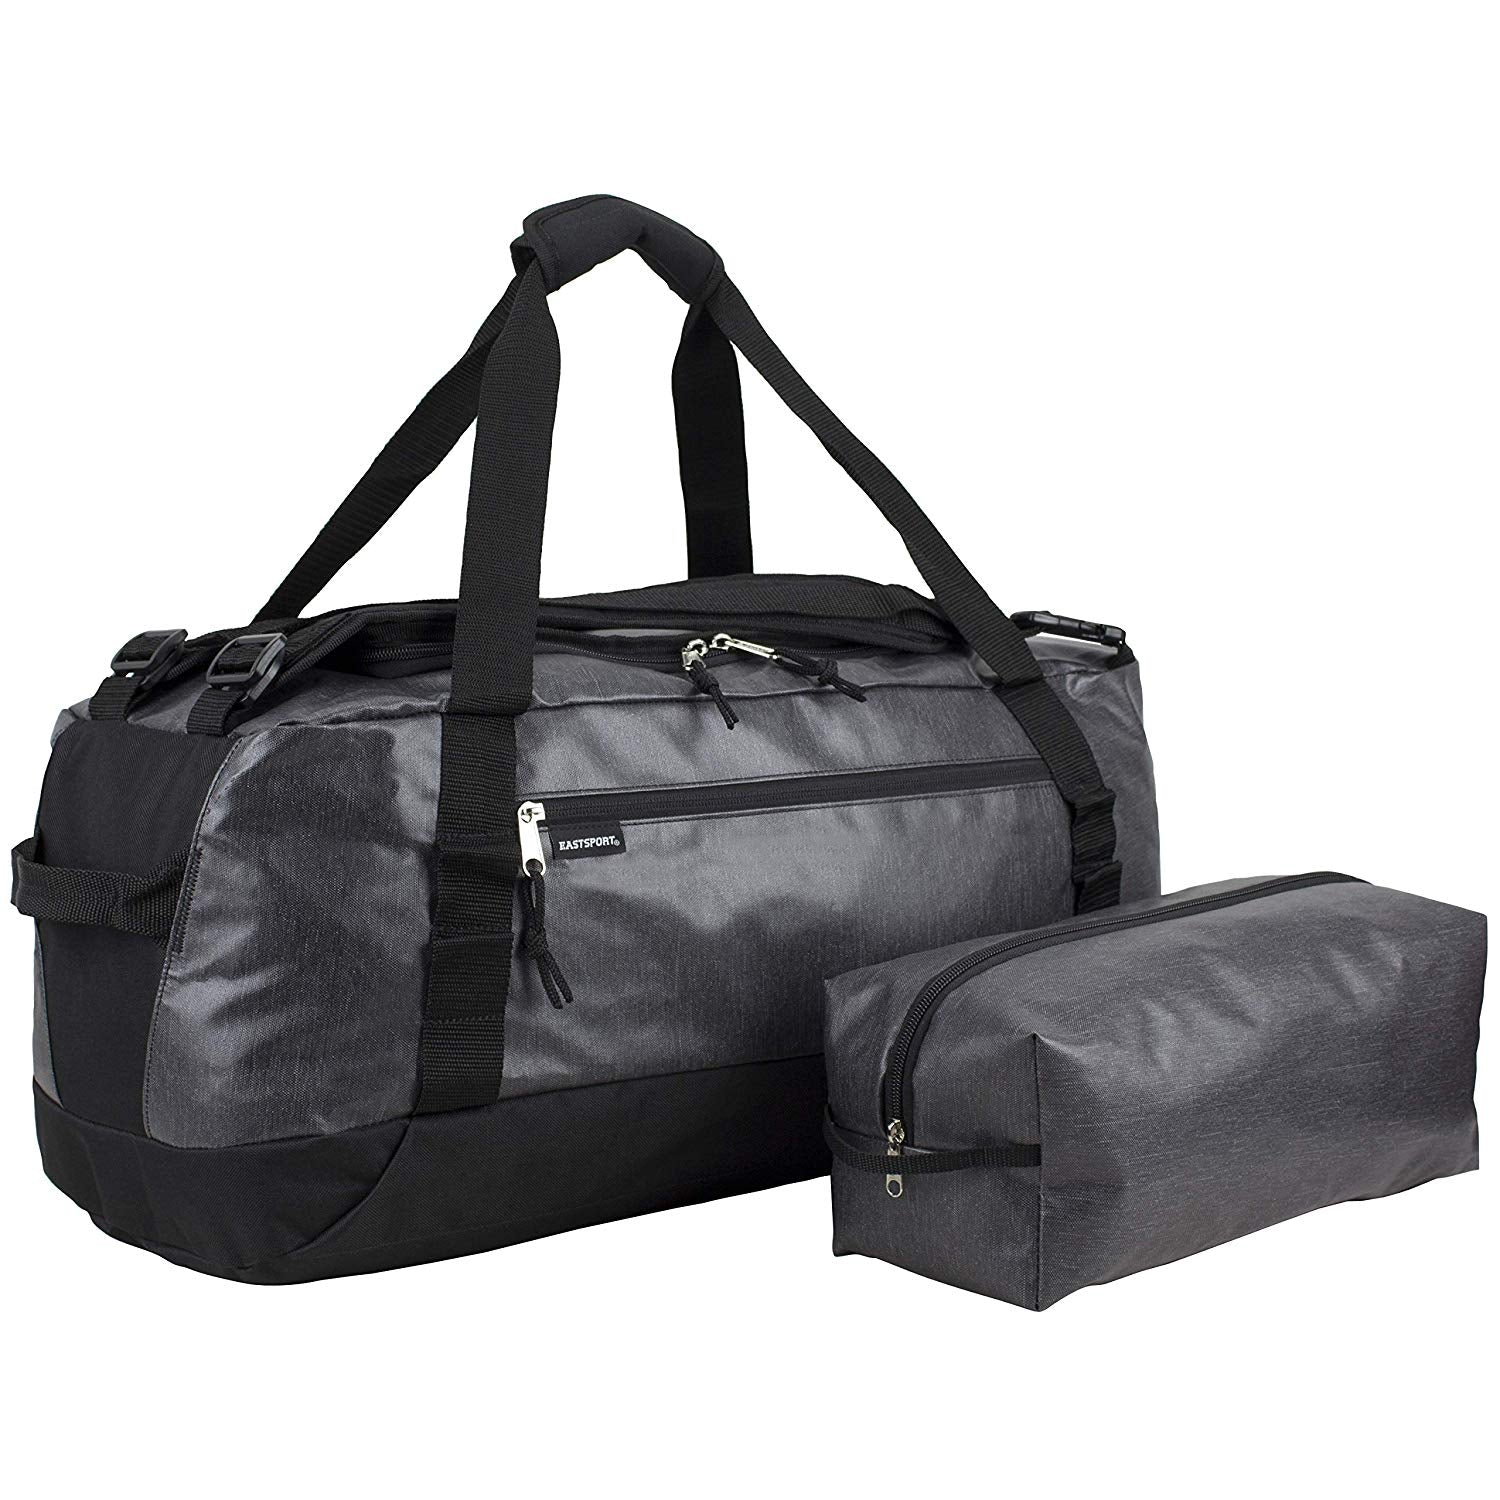 Eastsport 2in1 Large Convertible Lightweight 24” Duffel Bag/Backpack for Travel, Sport Activities or Weekend Gateway